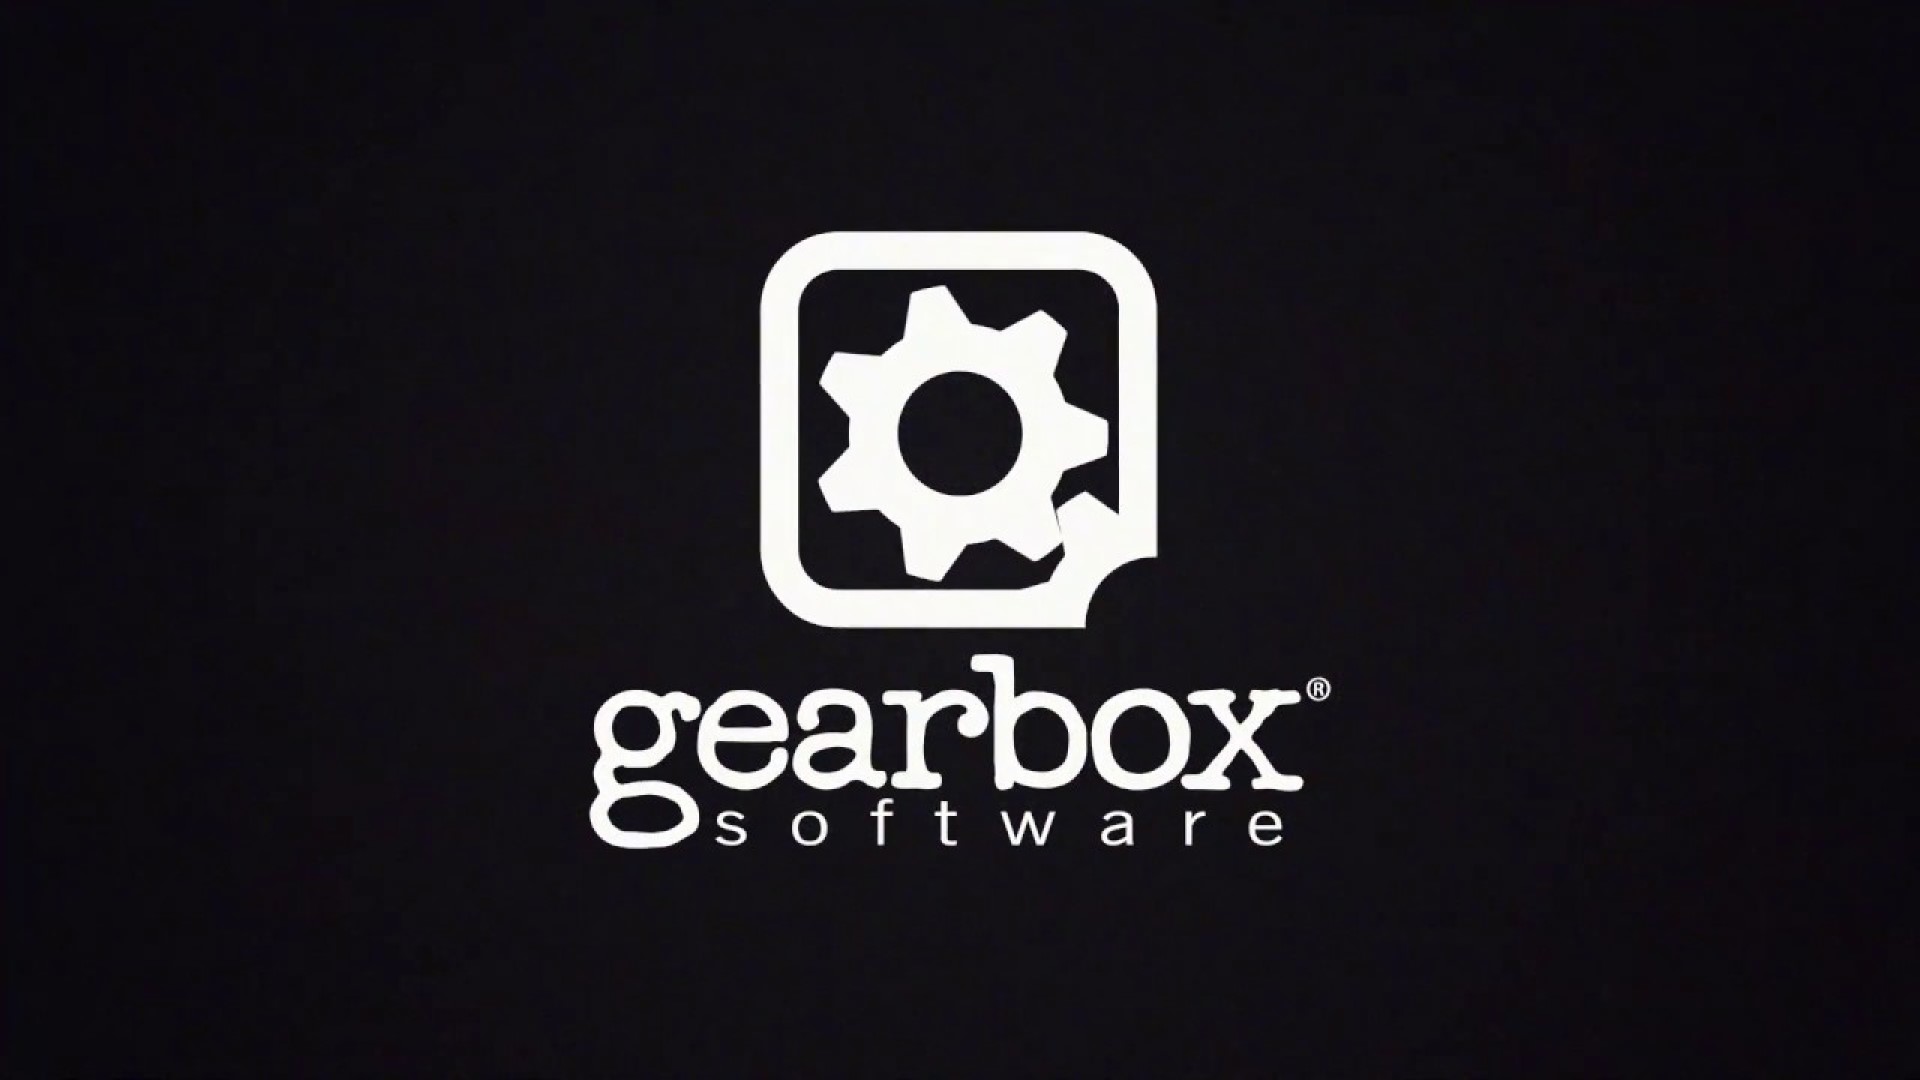 Gearbox壺ڲԱϷ޹